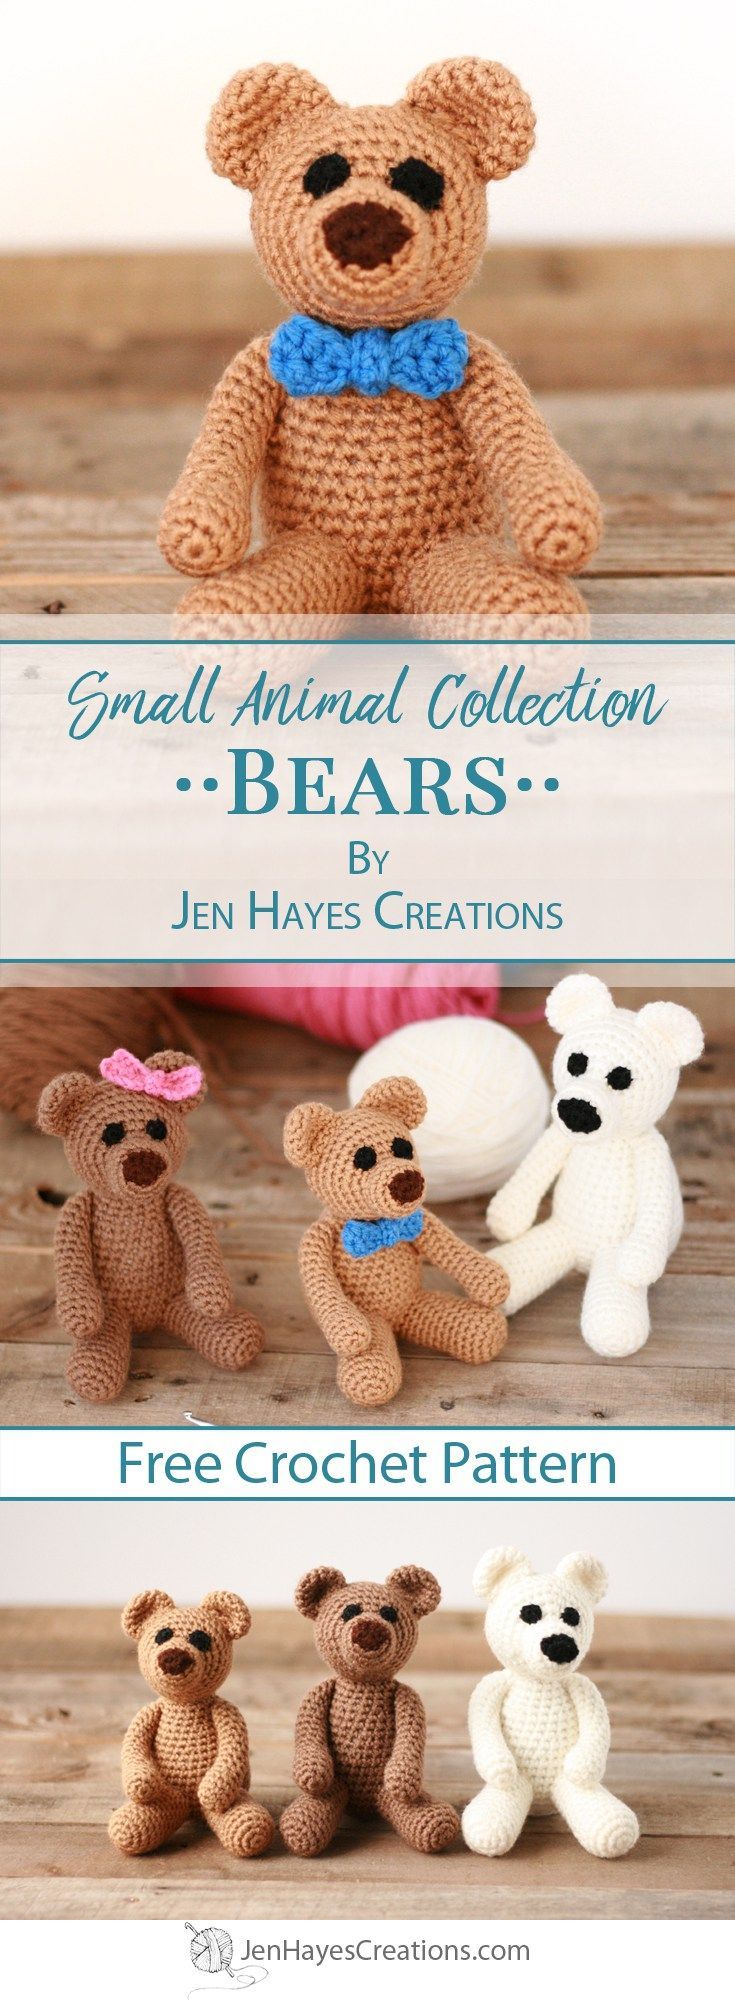 Small Animal Collection: Bears -   24 small animal crafts
 ideas